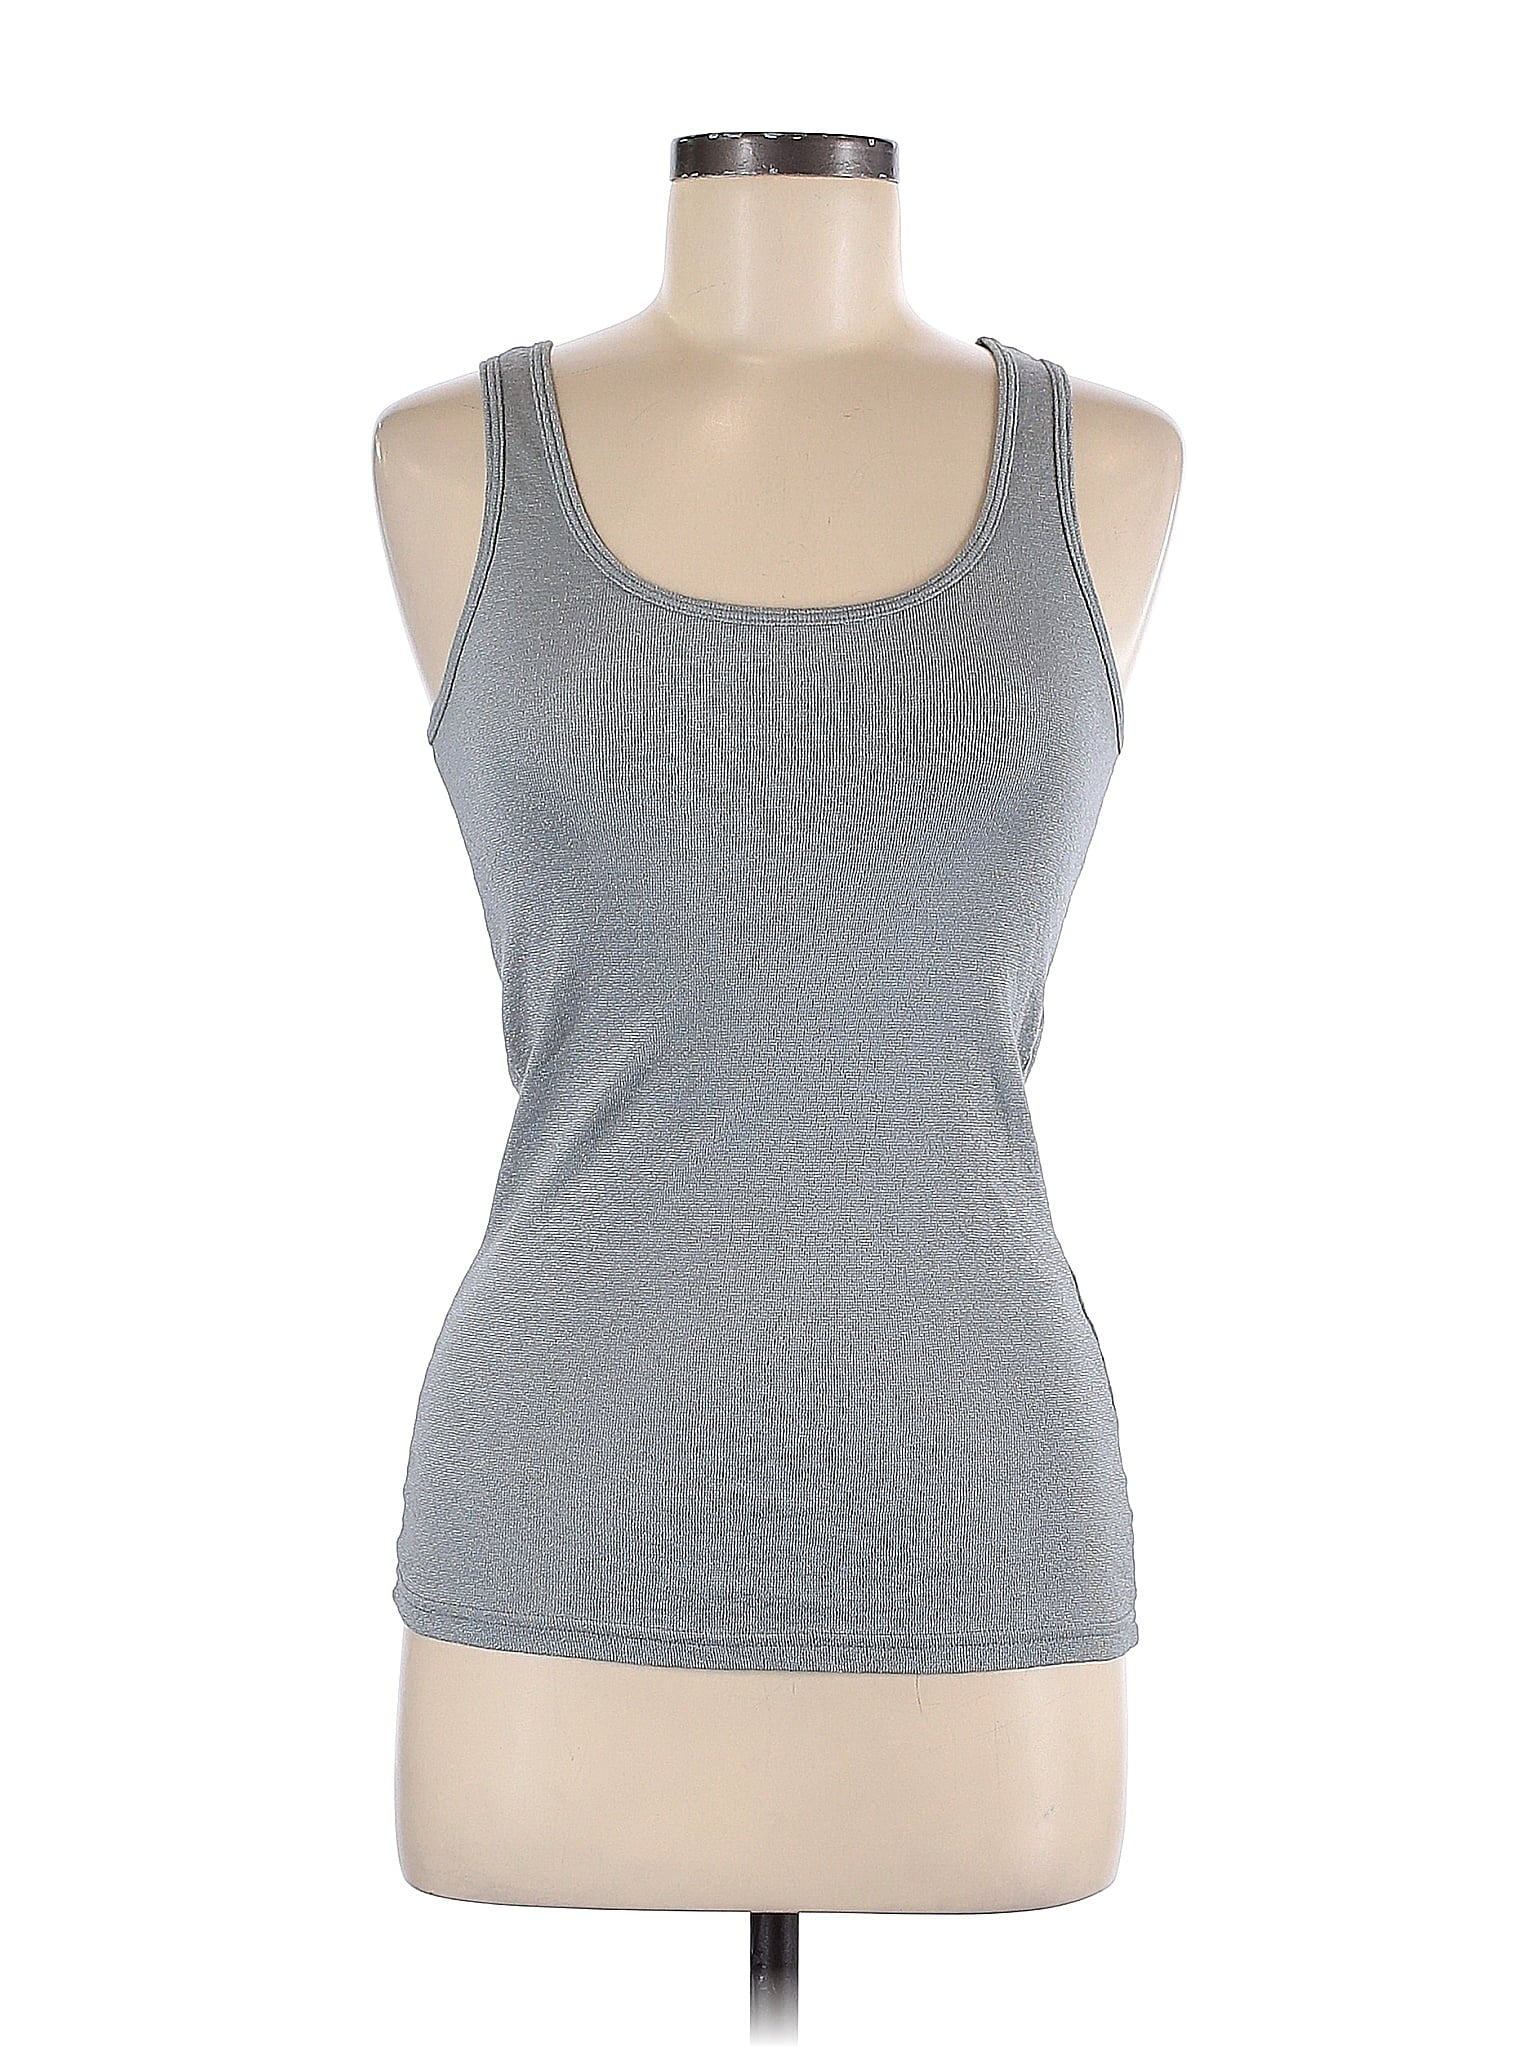 Tank Top size - One Size